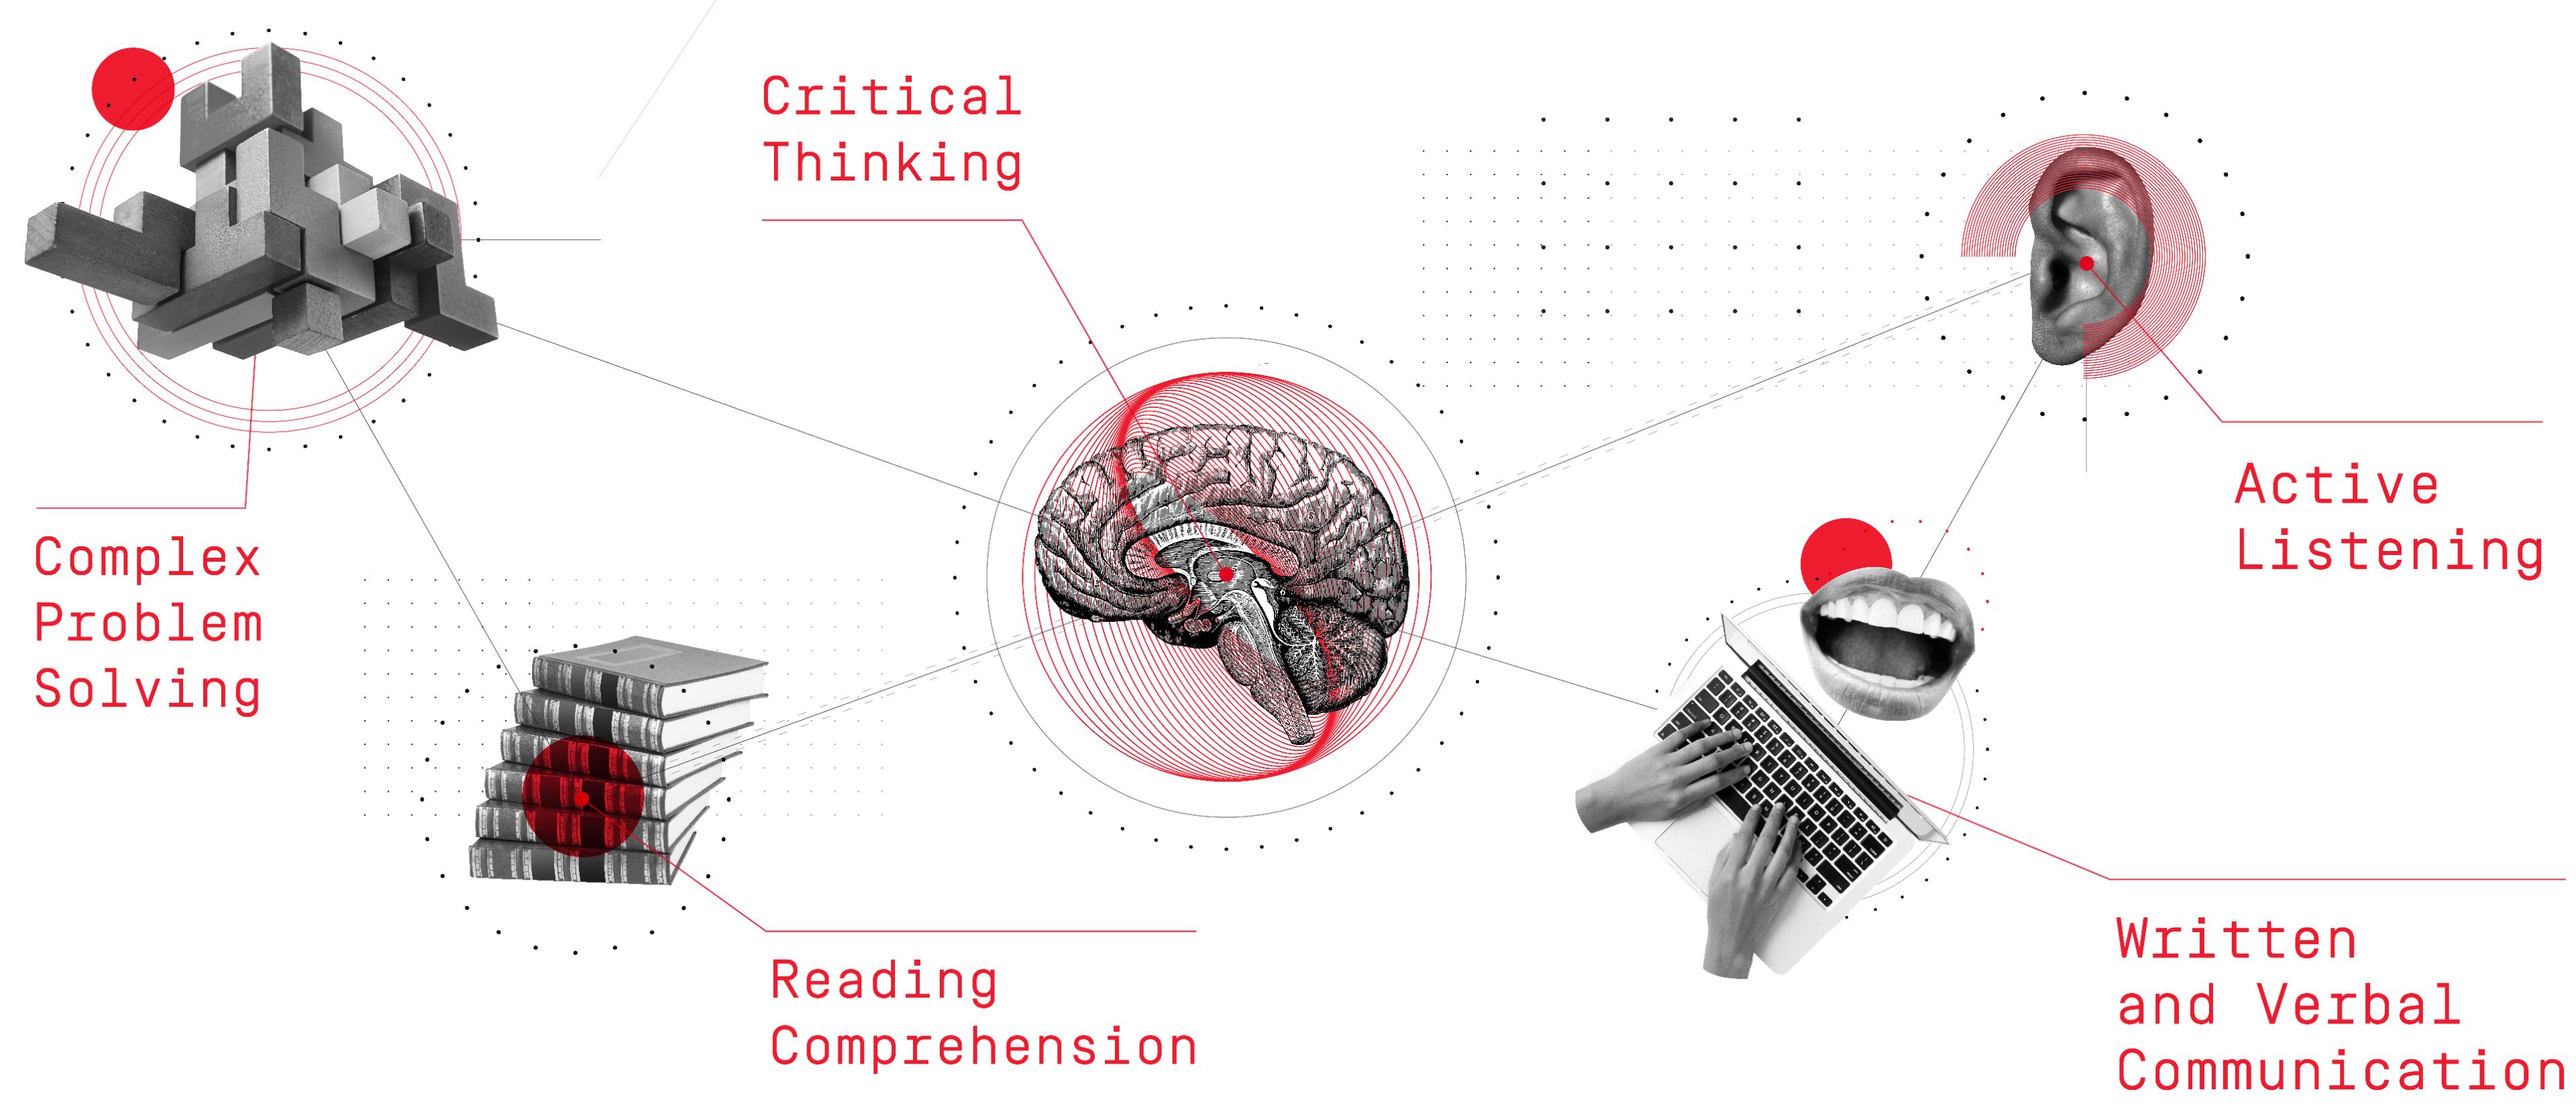 Infographic shows visuals for active listening (ear), written and verbal communication skills (hands on keyboard and mouth), reading comprehension (stack of books), critical thinking (brain), and complex problem solving (cubic puzzle). All are linked and interconnected..